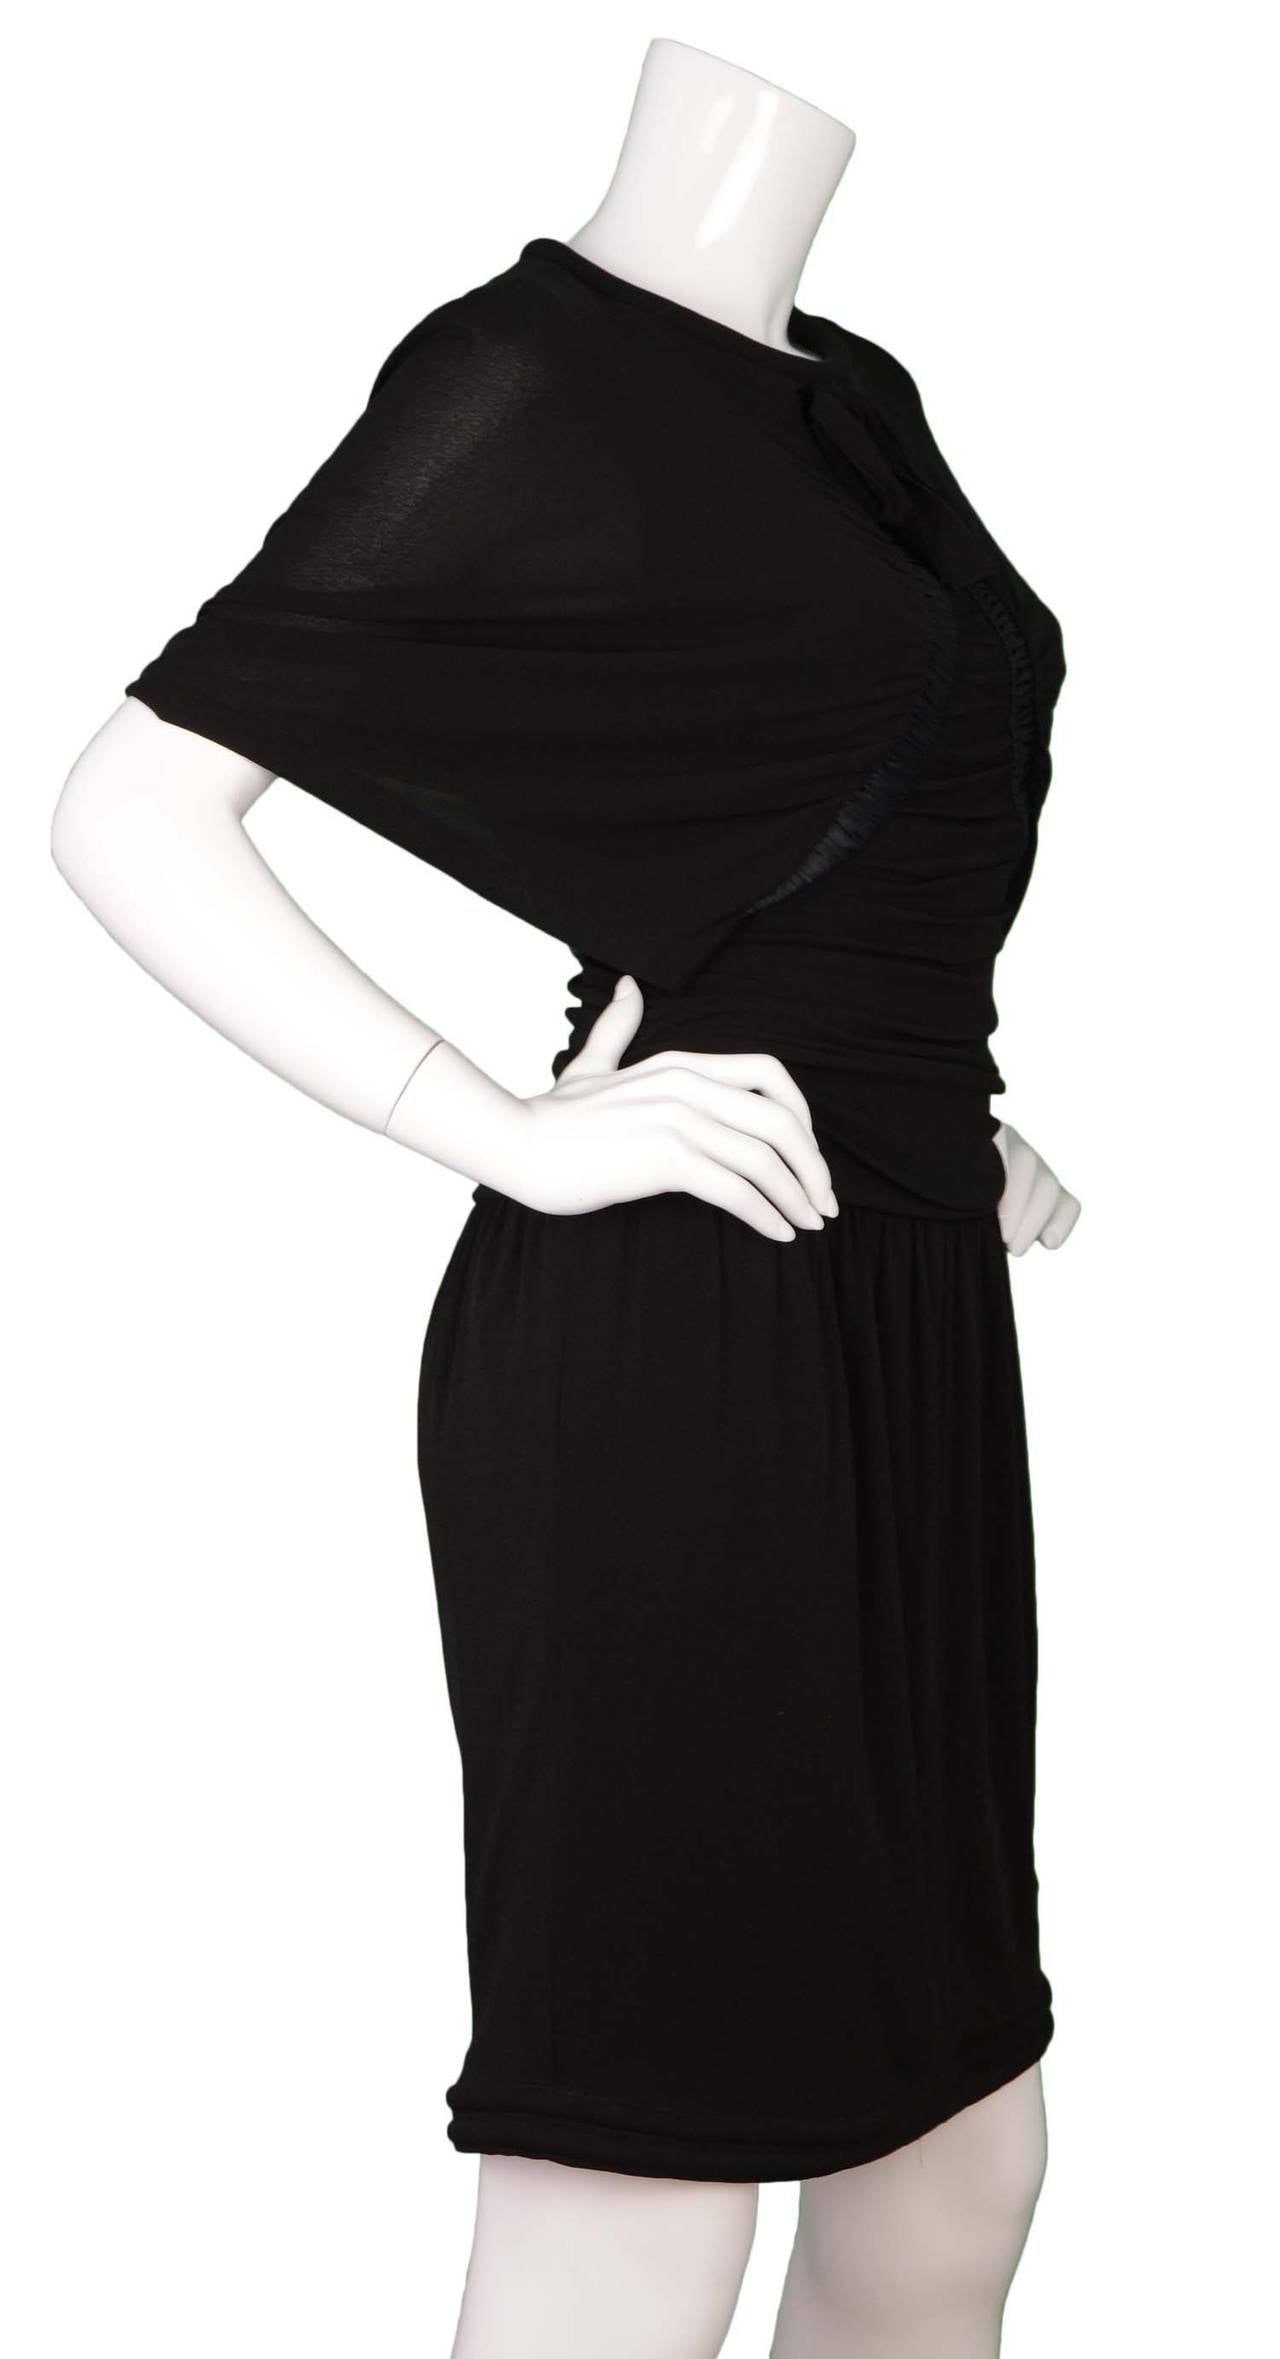 Chanel Black Silk Dolman Sleeve Dress
Features ruching throughout, tie at neckline, and rhinestone detailed heart button at back neckline
Made in: France
Year of Production: 2009
Color: Black
Composition: 100% silk
Lining: Black, 95% silk, 5%